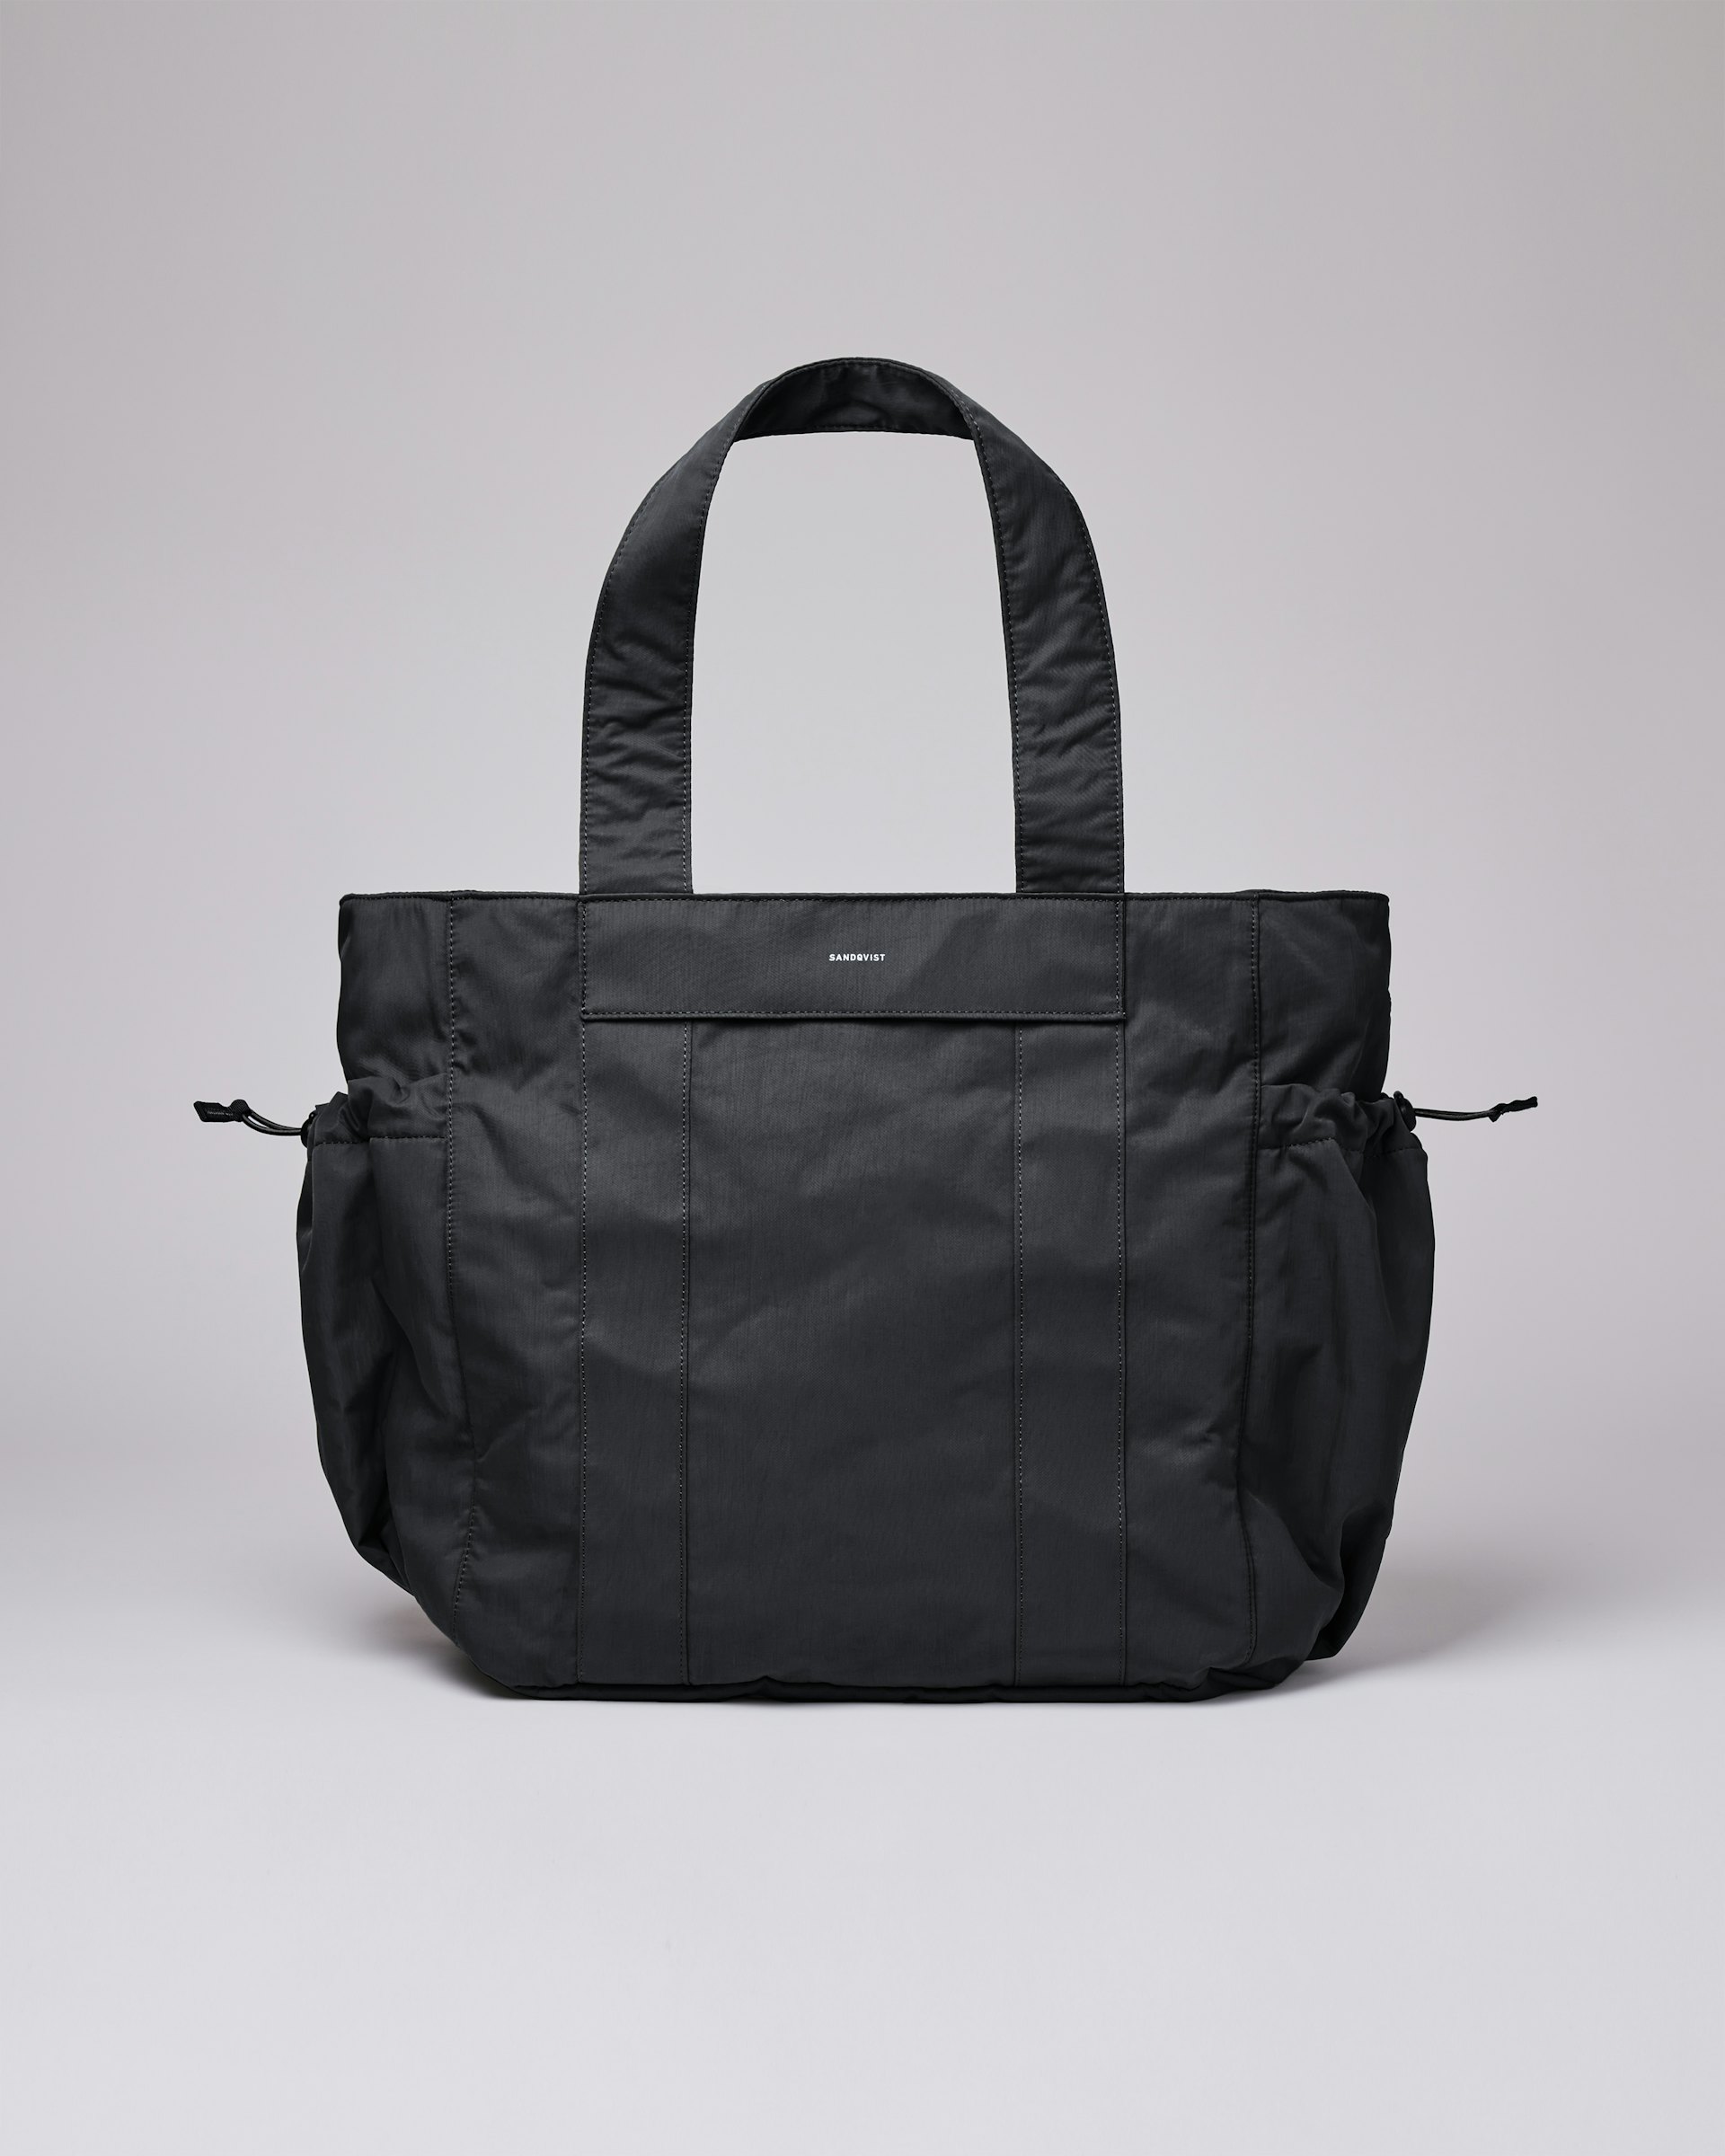 Sigrid belongs to the category Tote bags and is in color black